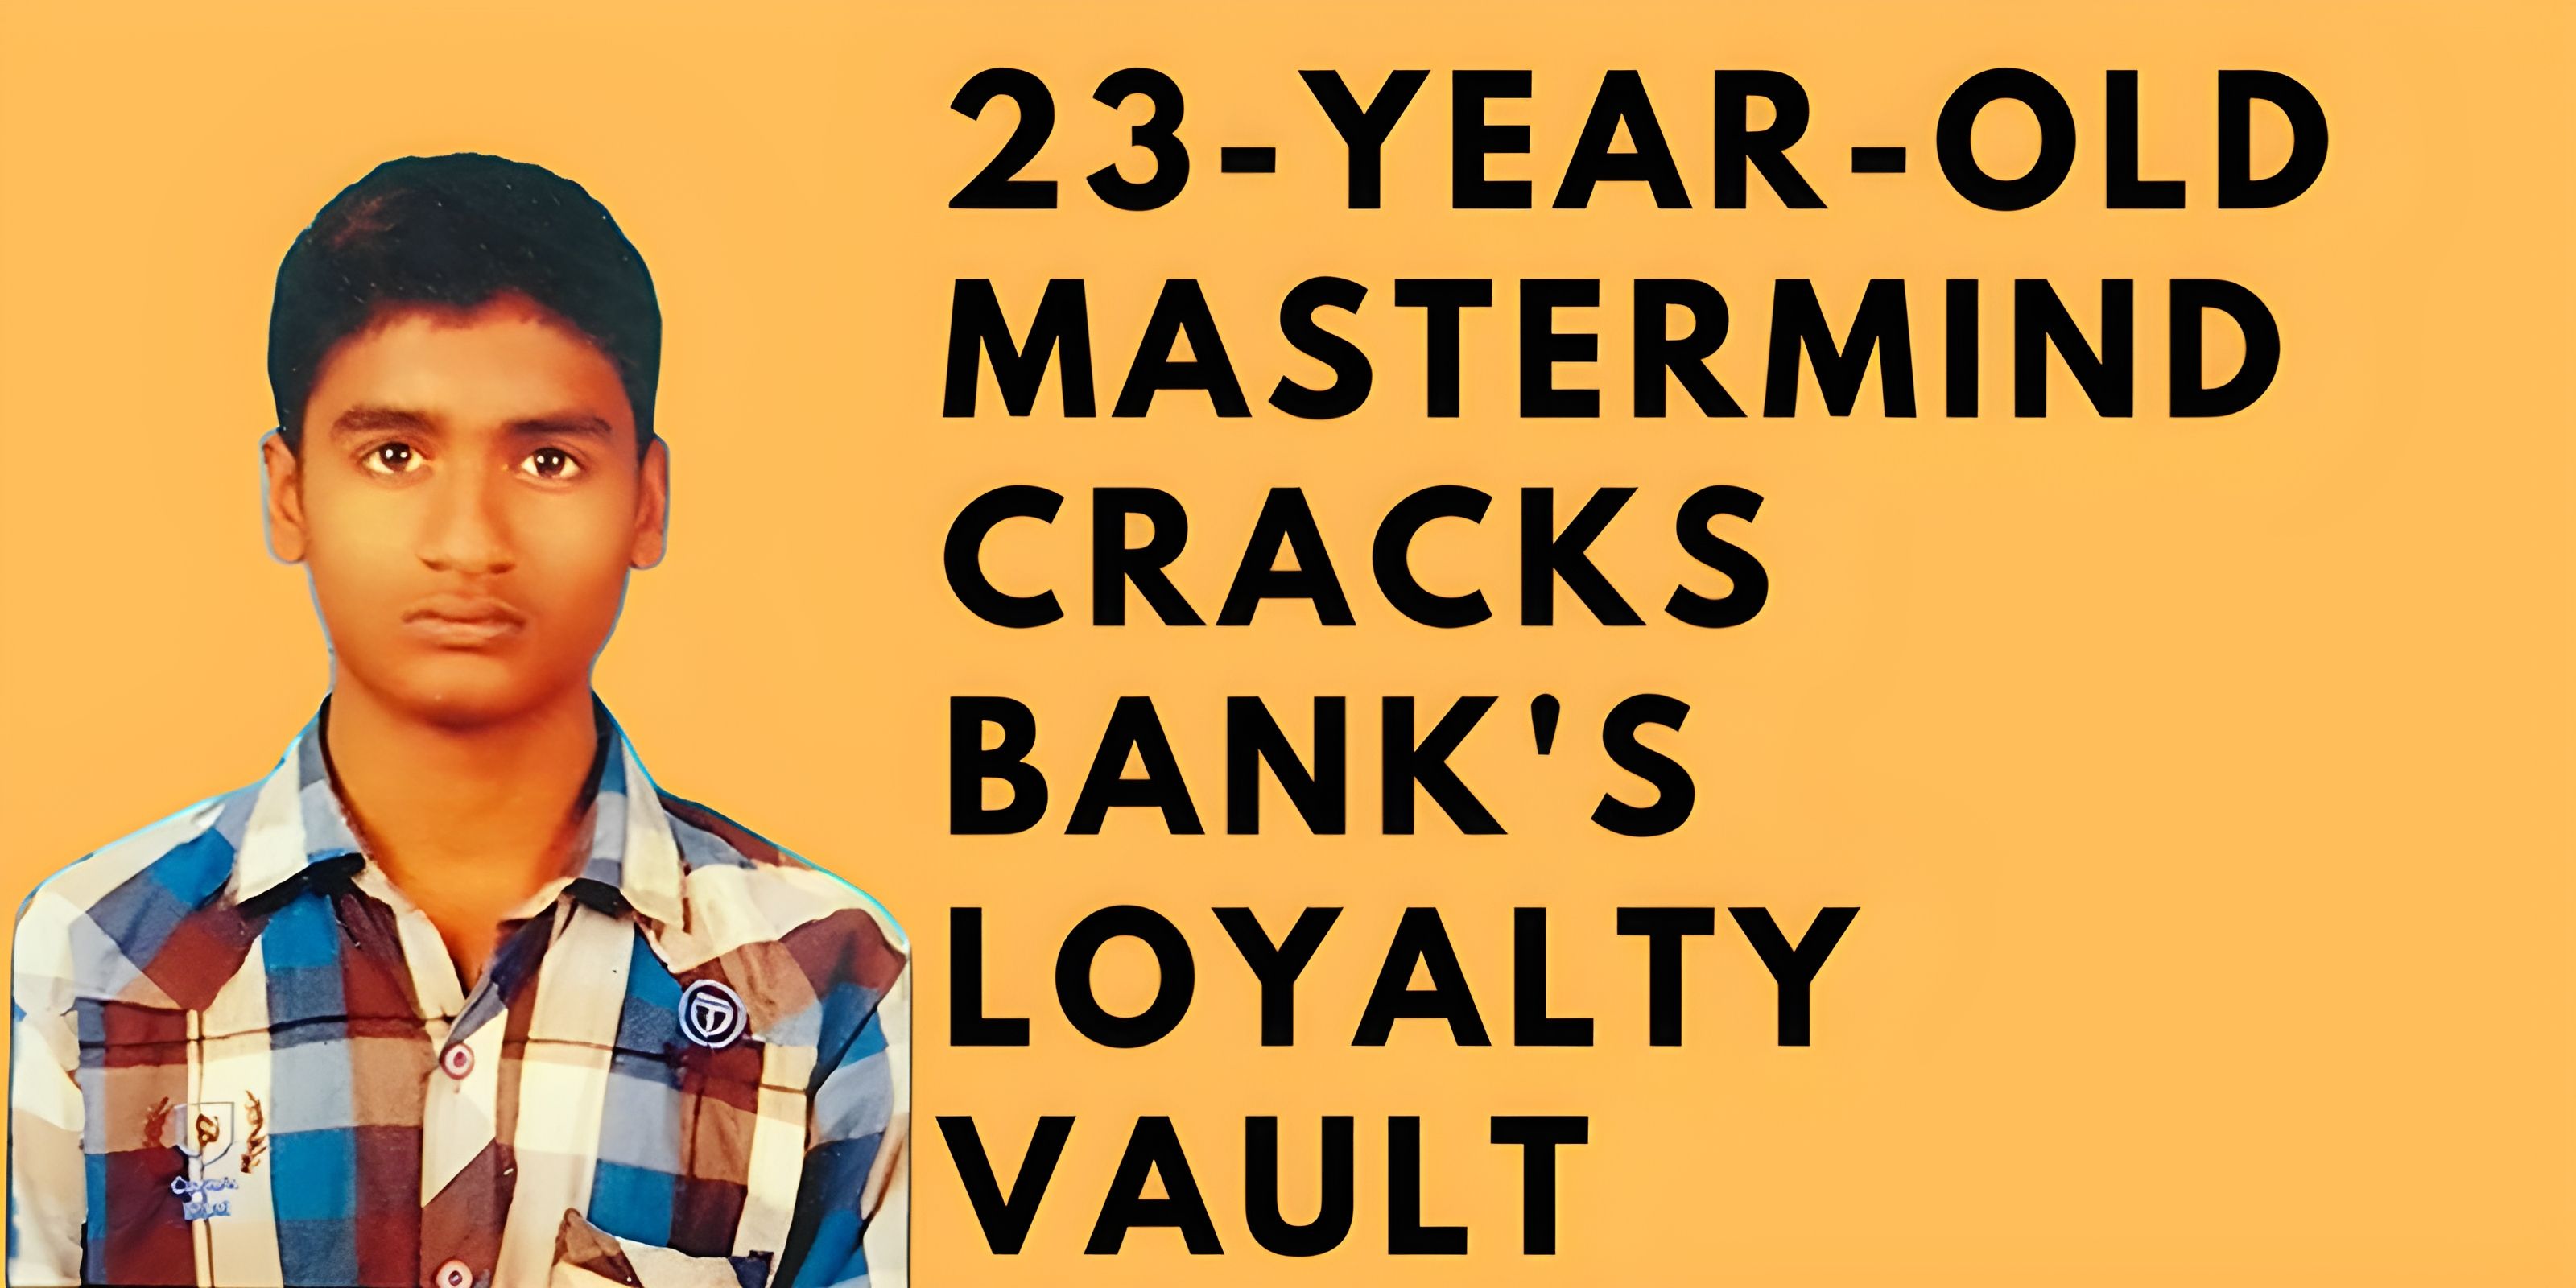 23-Year-Old Mastermind Cracks Bank's Loyalty Vault: Must Read